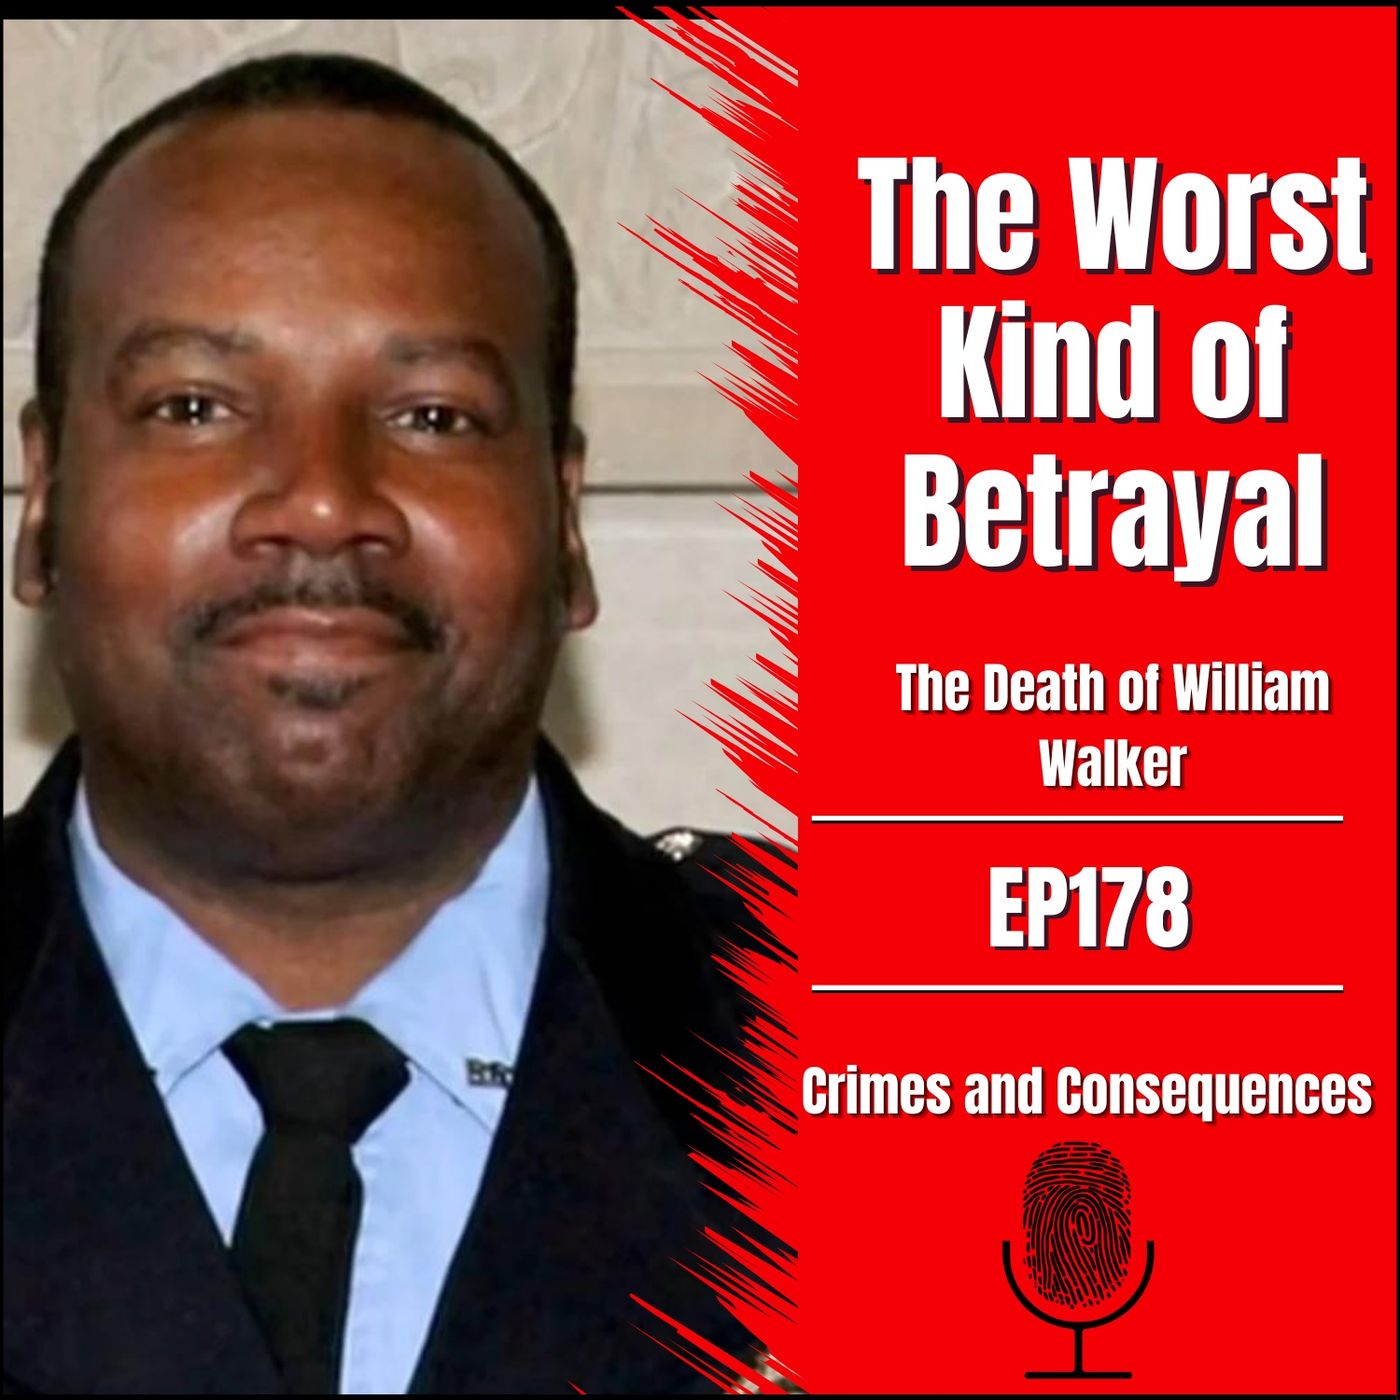 EP178: The Worst Kind of Betrayal